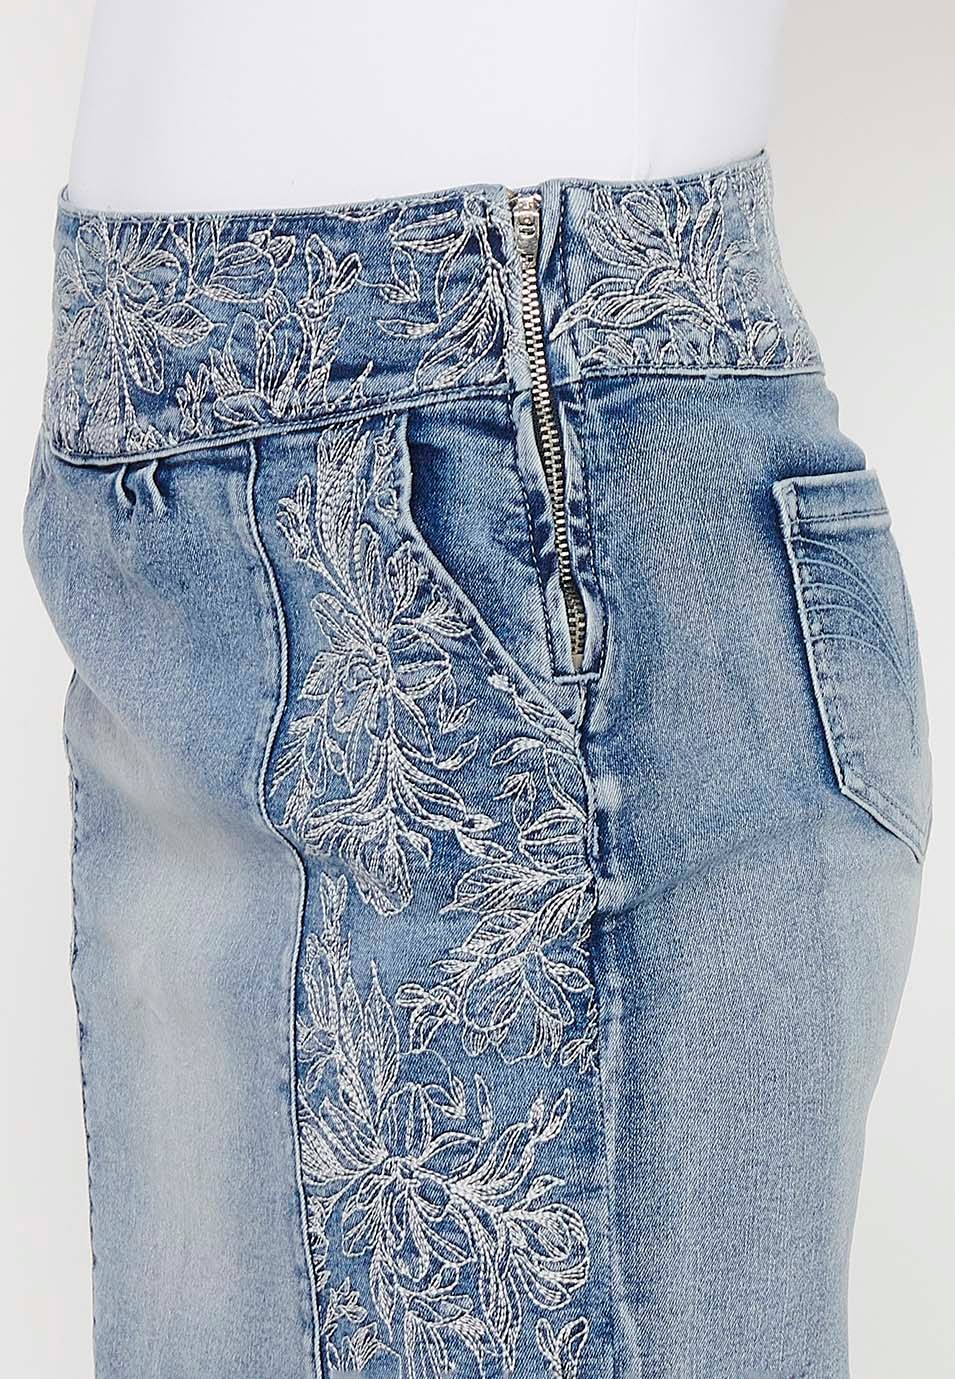 Short denim skirt with wide embroidered waist and floral embroidered details with side zipper closure in Blue for Women 6